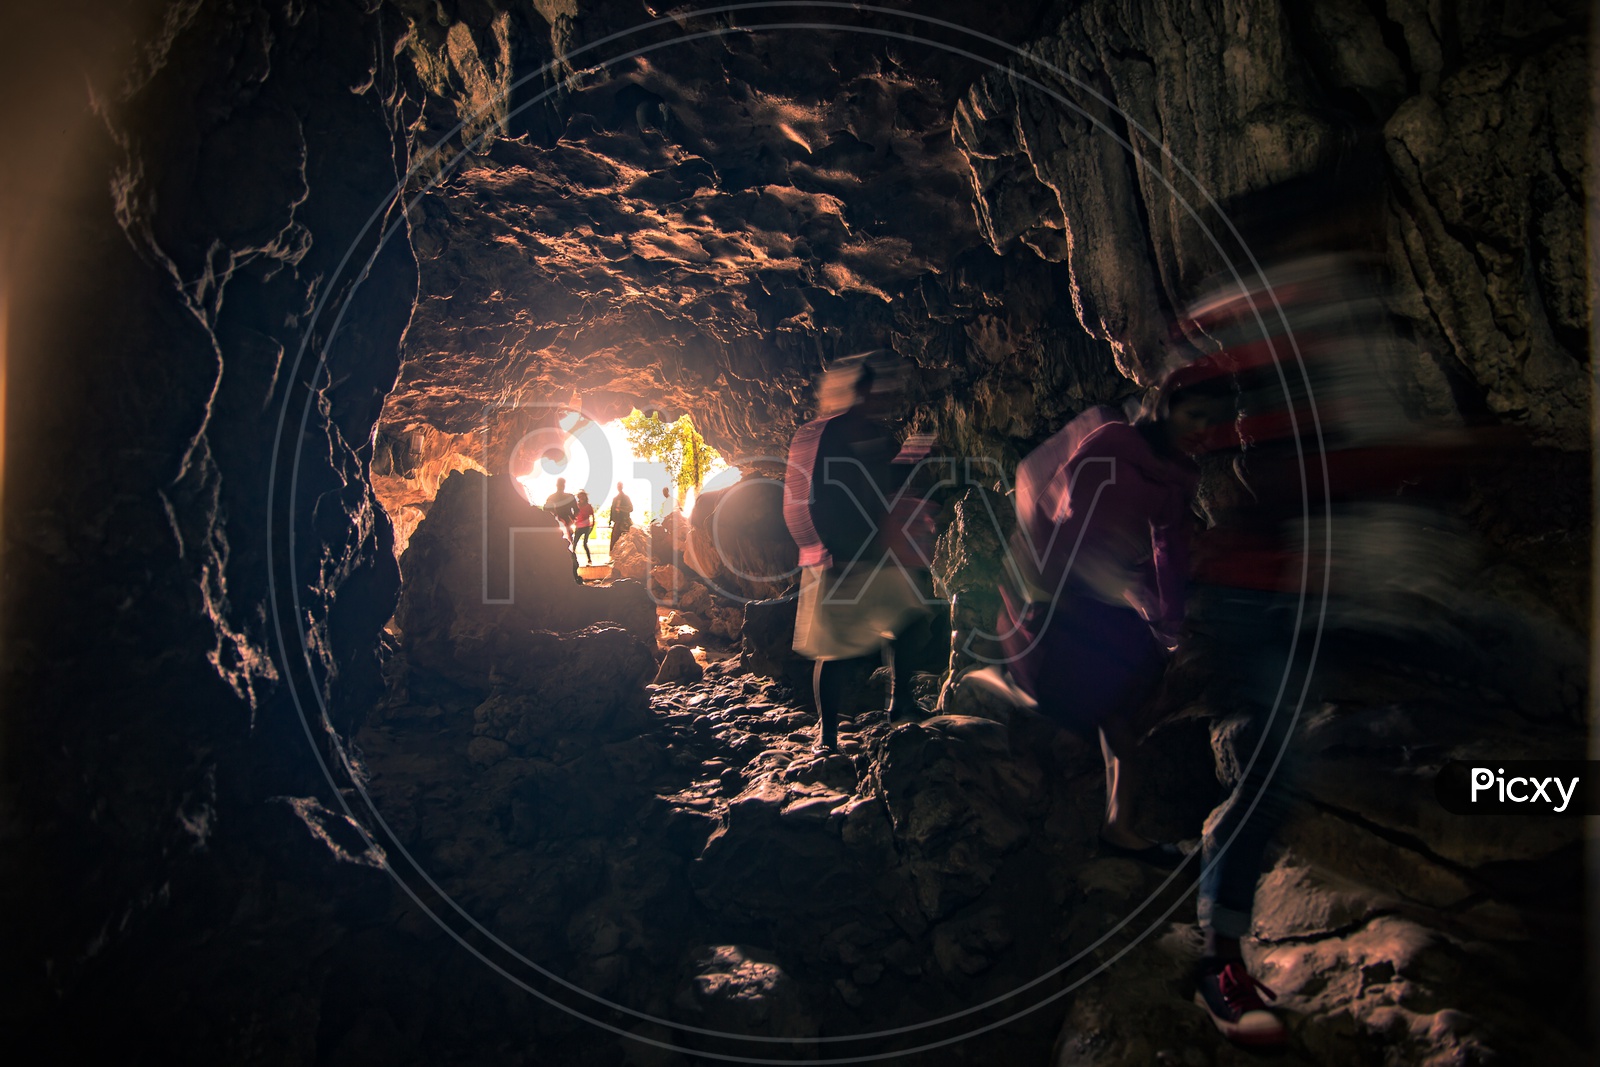 People Walking Into a Cave